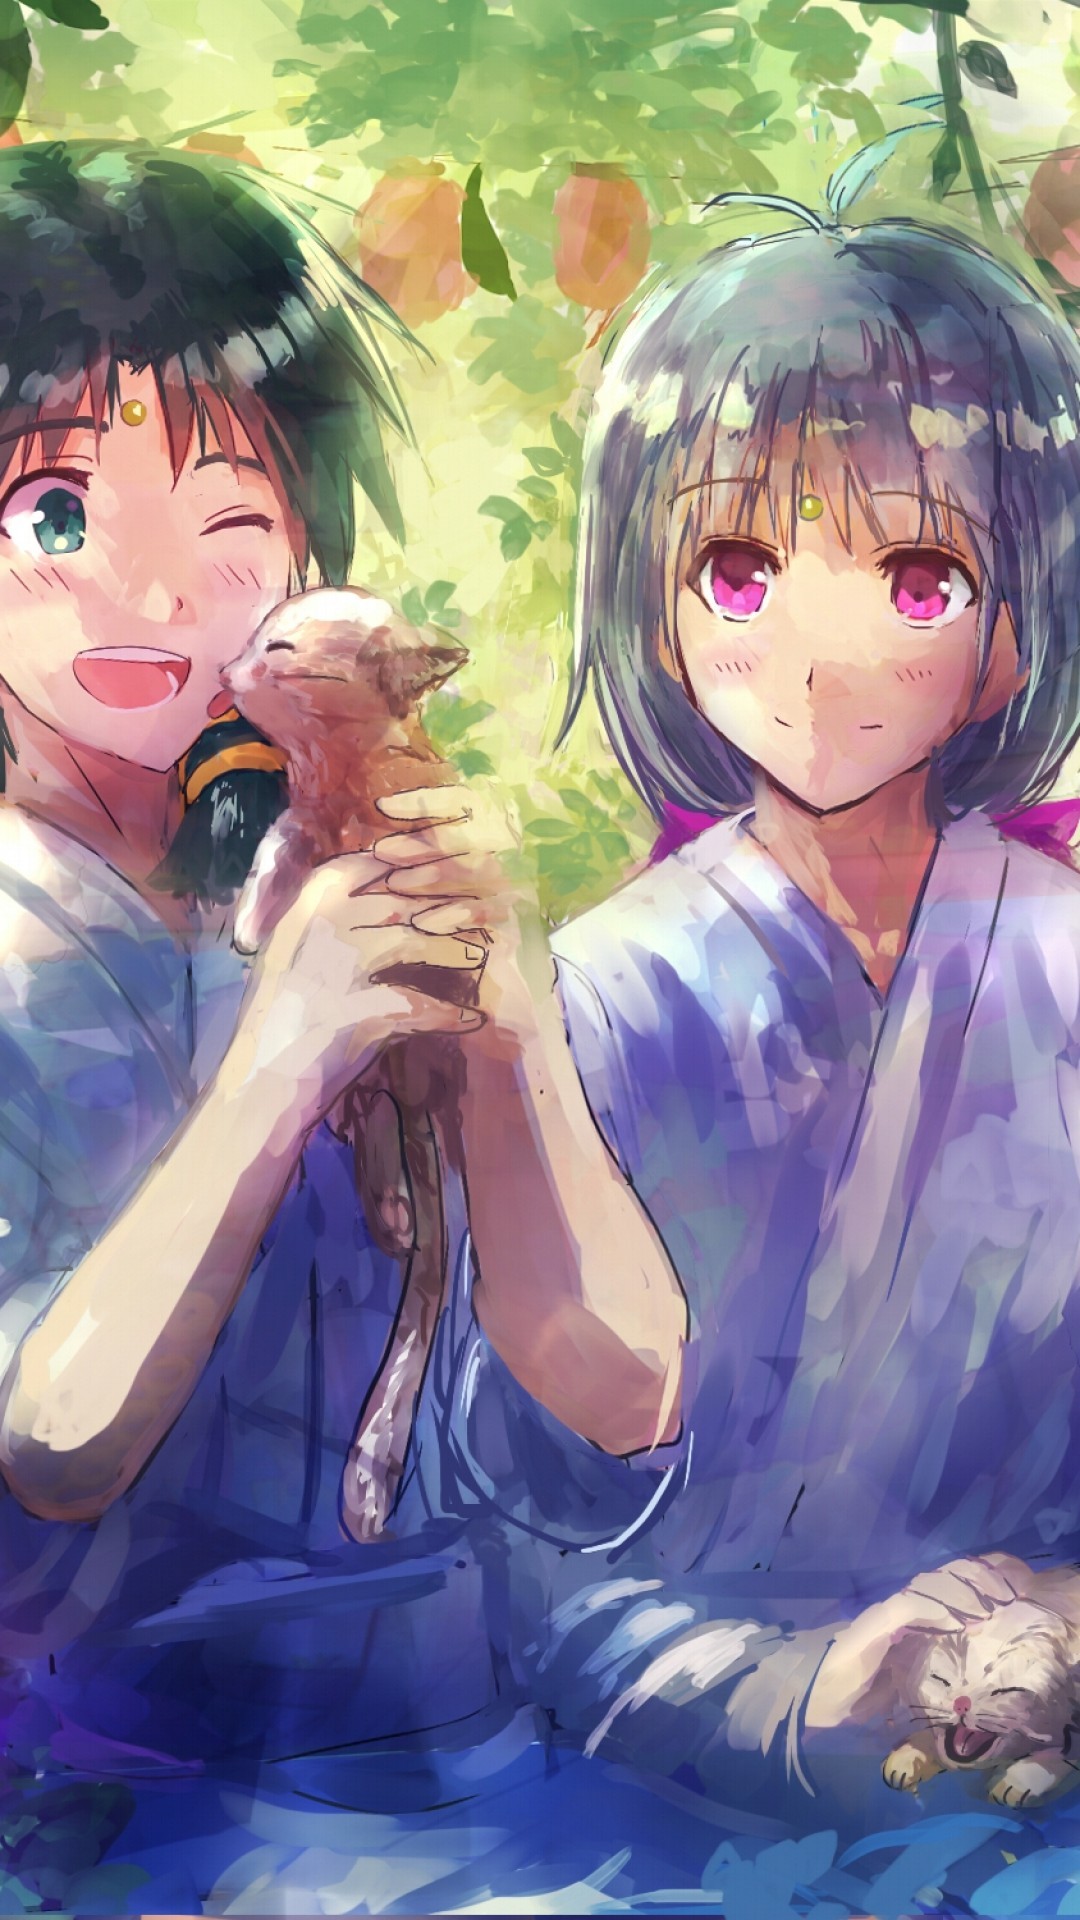 1080x1920 Anime Couple, Painting, Cats, Flowers, Smiling